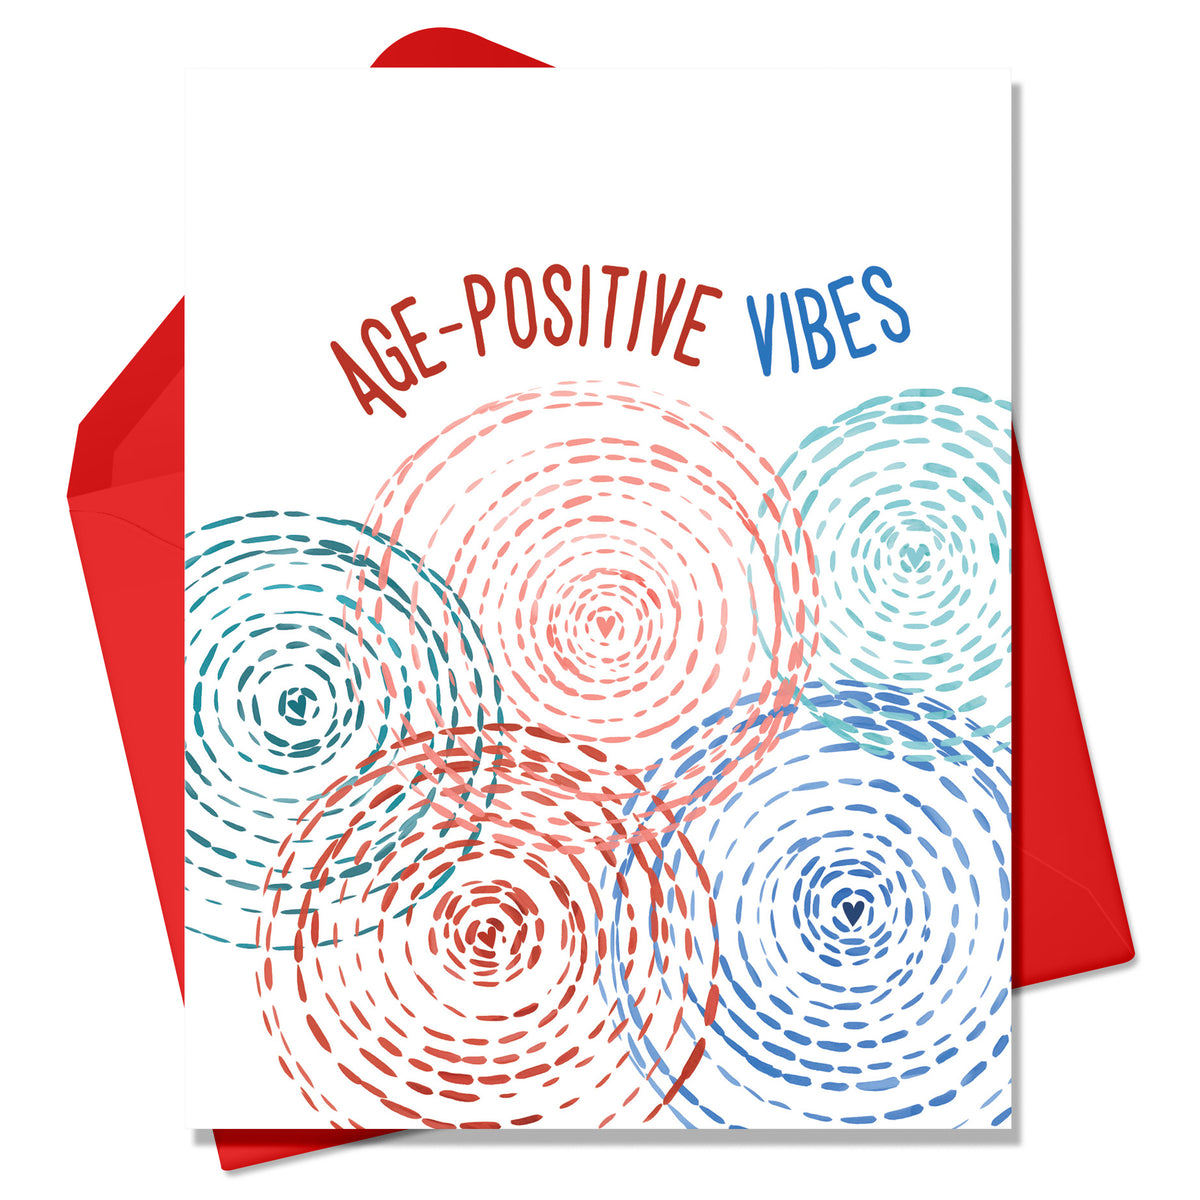 Age Positive Vibes Greeting cards. Intersecting , radiating hand painted circles overlapping. . There is a red envelope and it sits on a white background. 